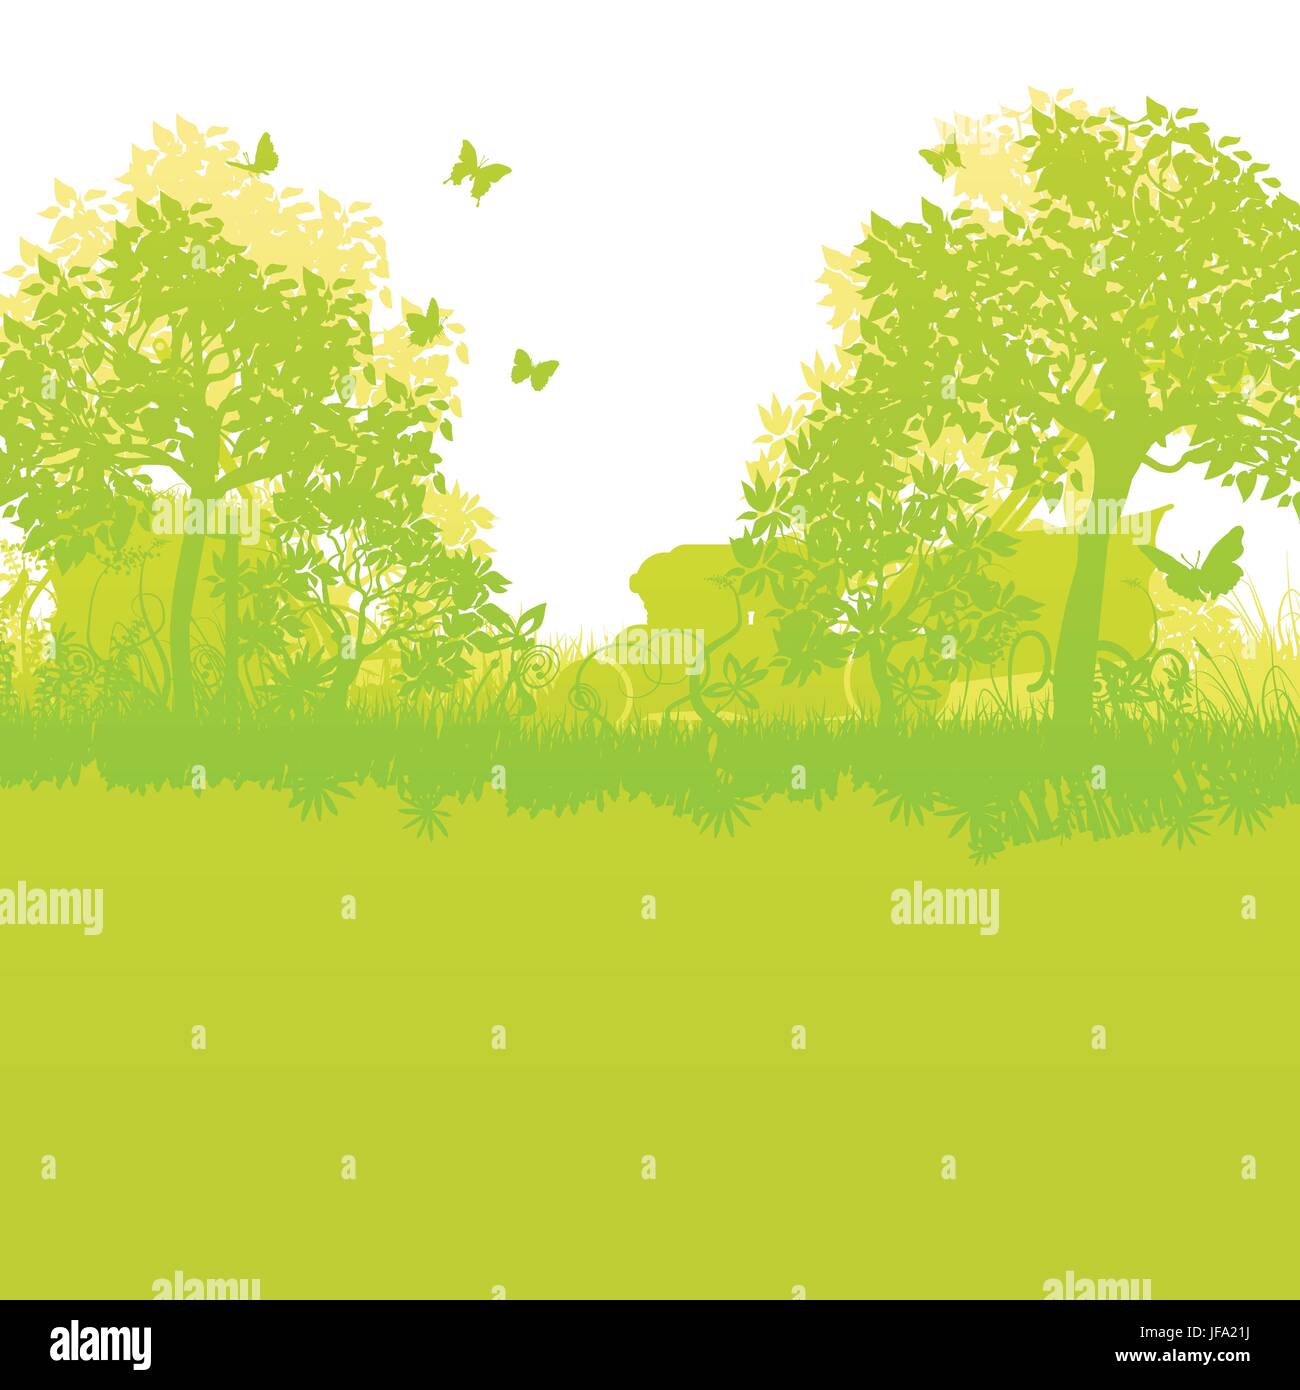 weed, mow, tidy, lawnmower, environment, enviroment, garden, green, butterfly, Stock Vector